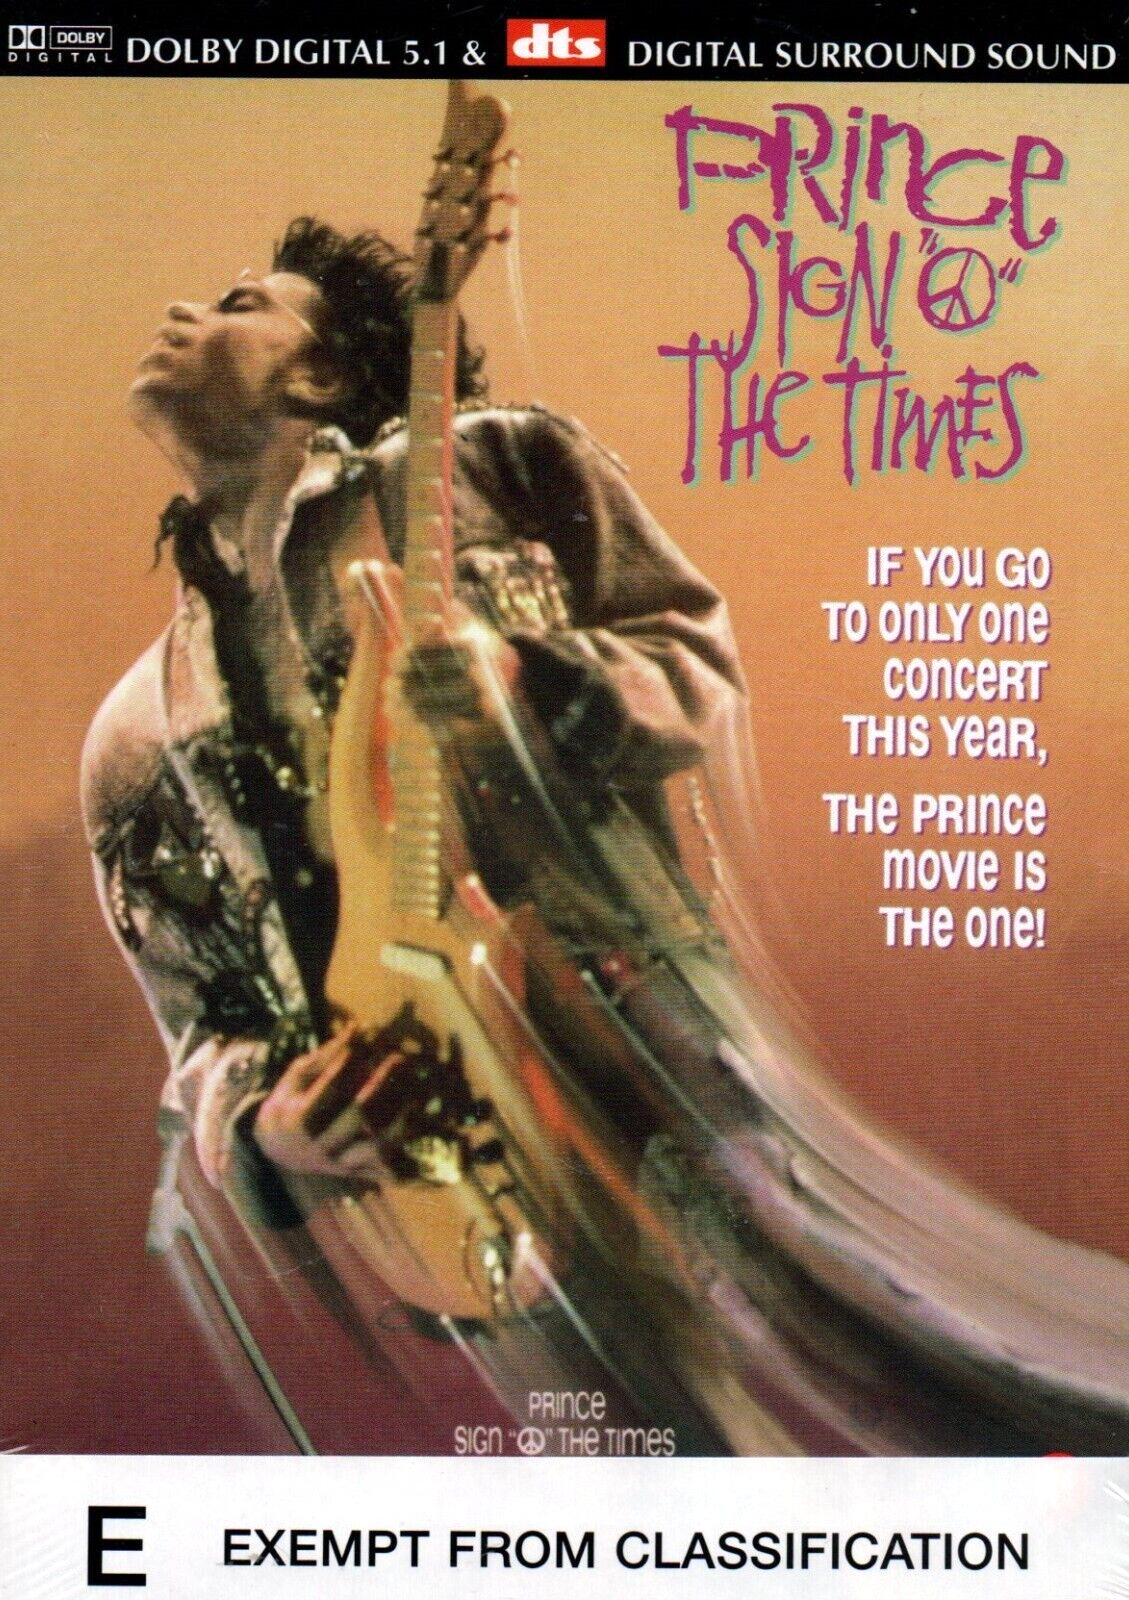 [NEW/SEALED DVD] [5.1 DTS] [PRINCE SIGN OF THE TIMES][R# O][PAL]YOUR CHOICE POST